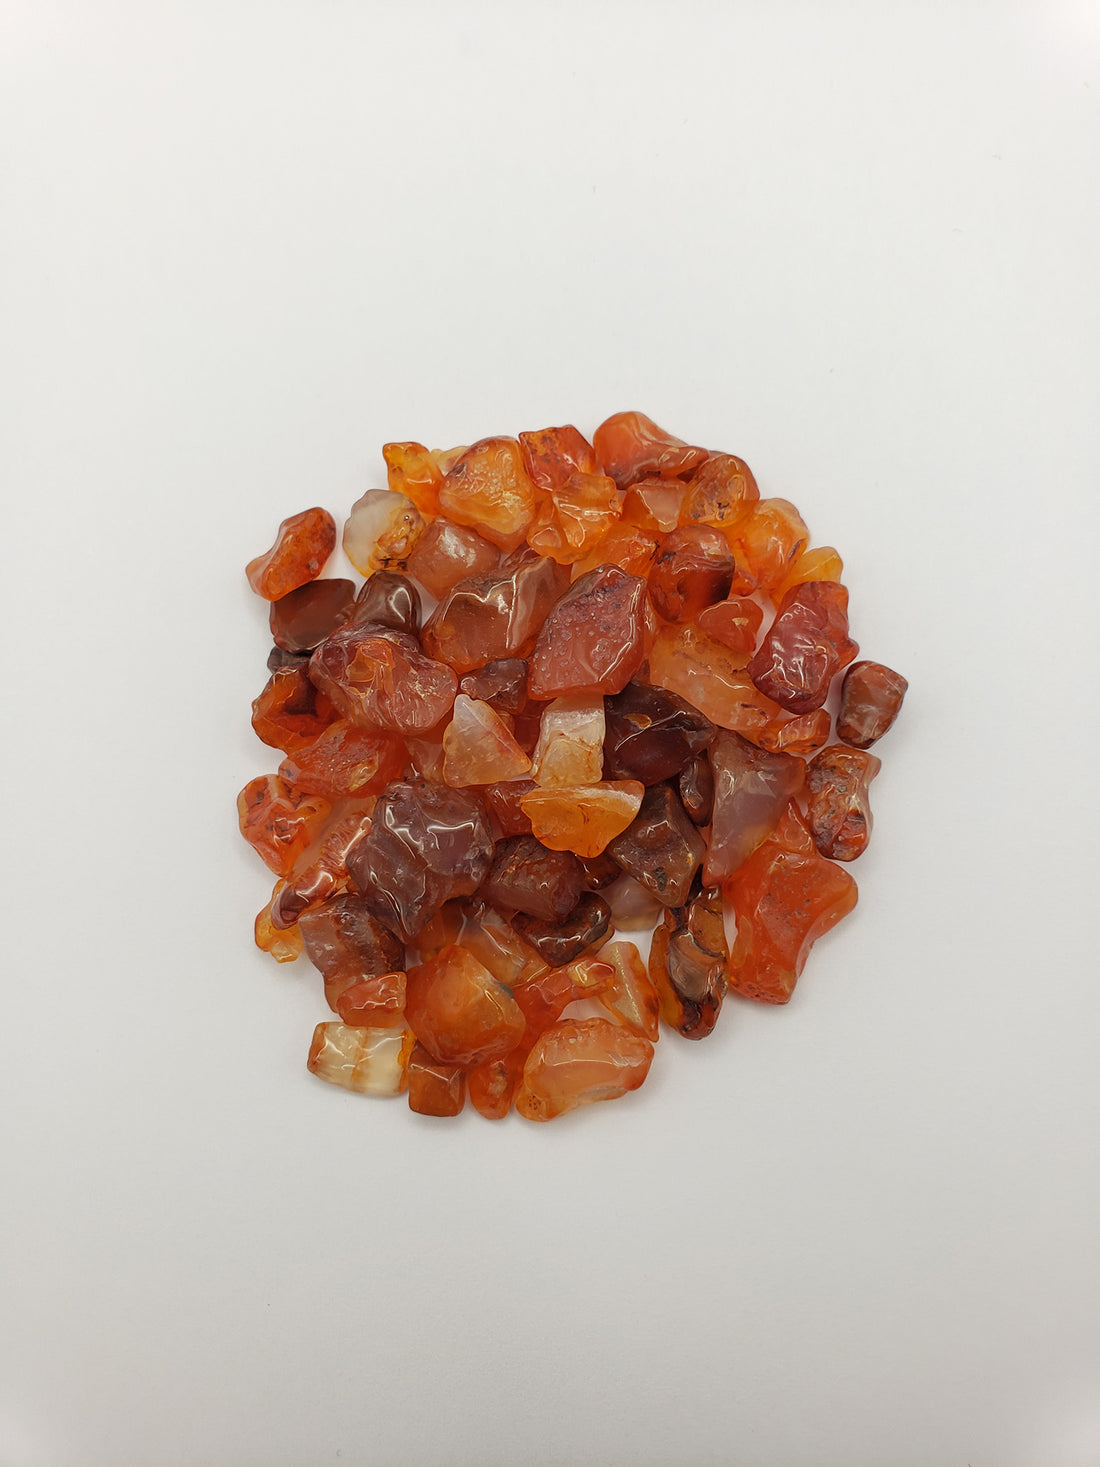 Carnelian stone chips on white background